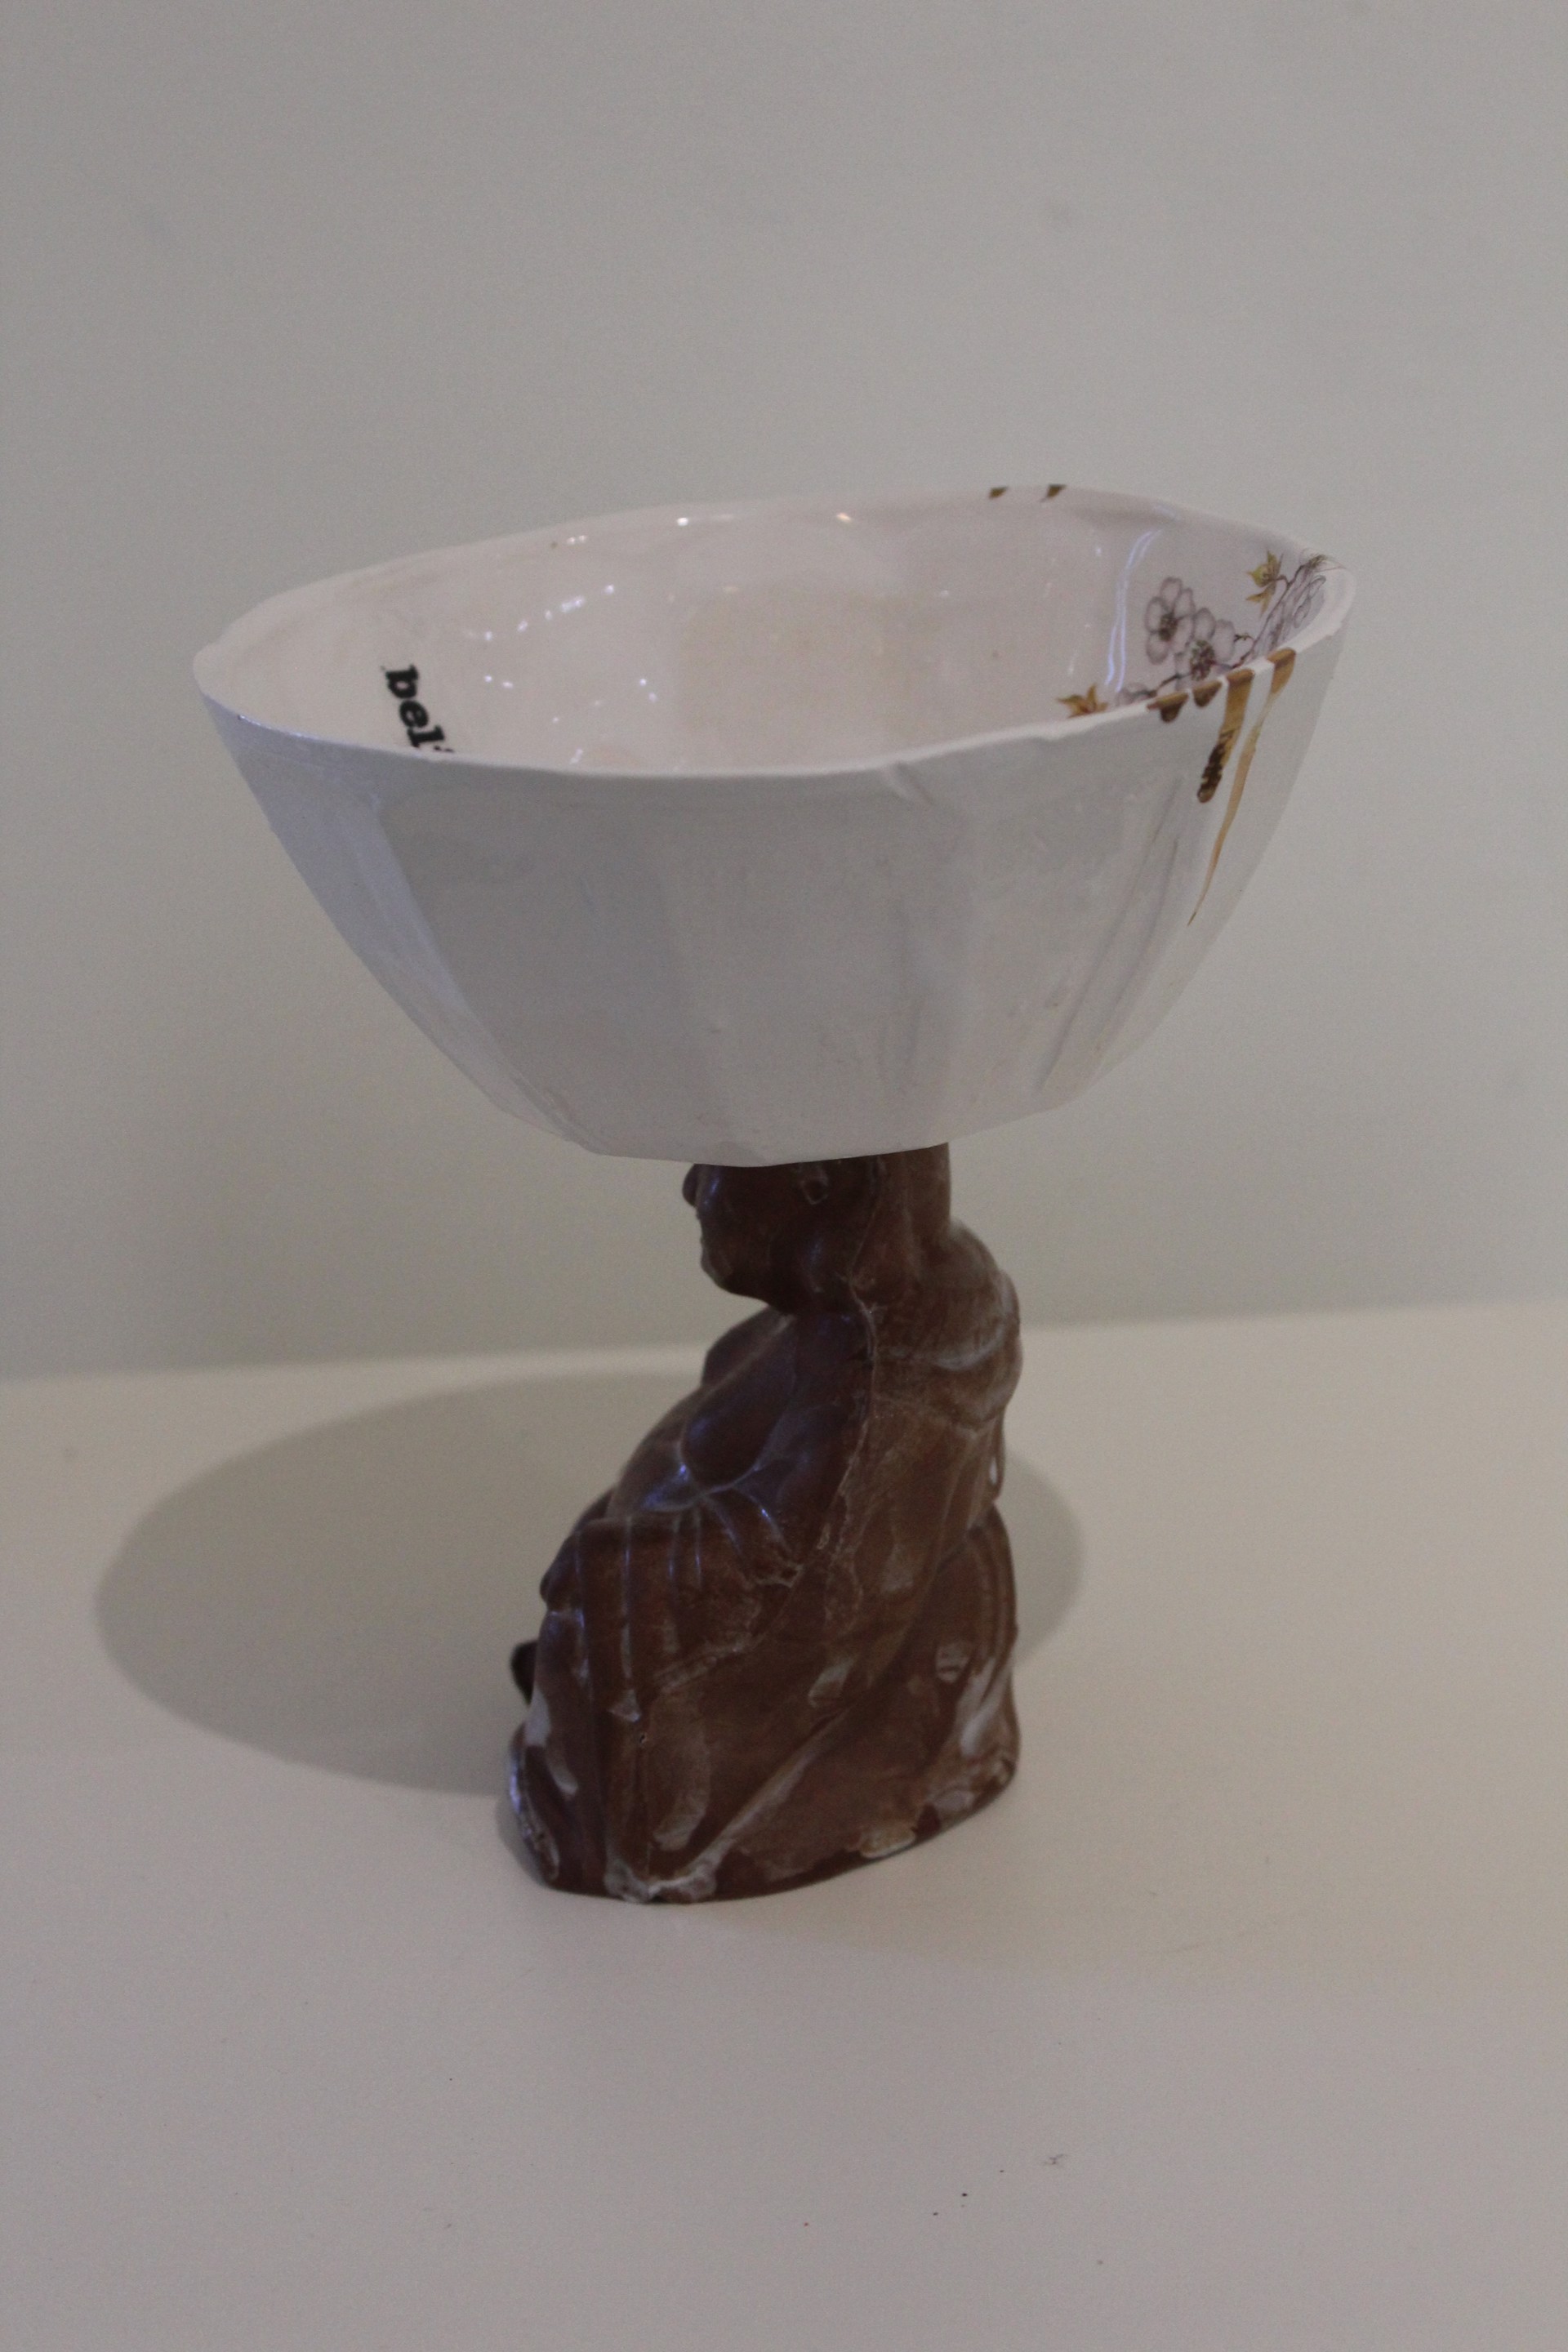 Buddha Bowl 2 (bird) by Therese Knowles